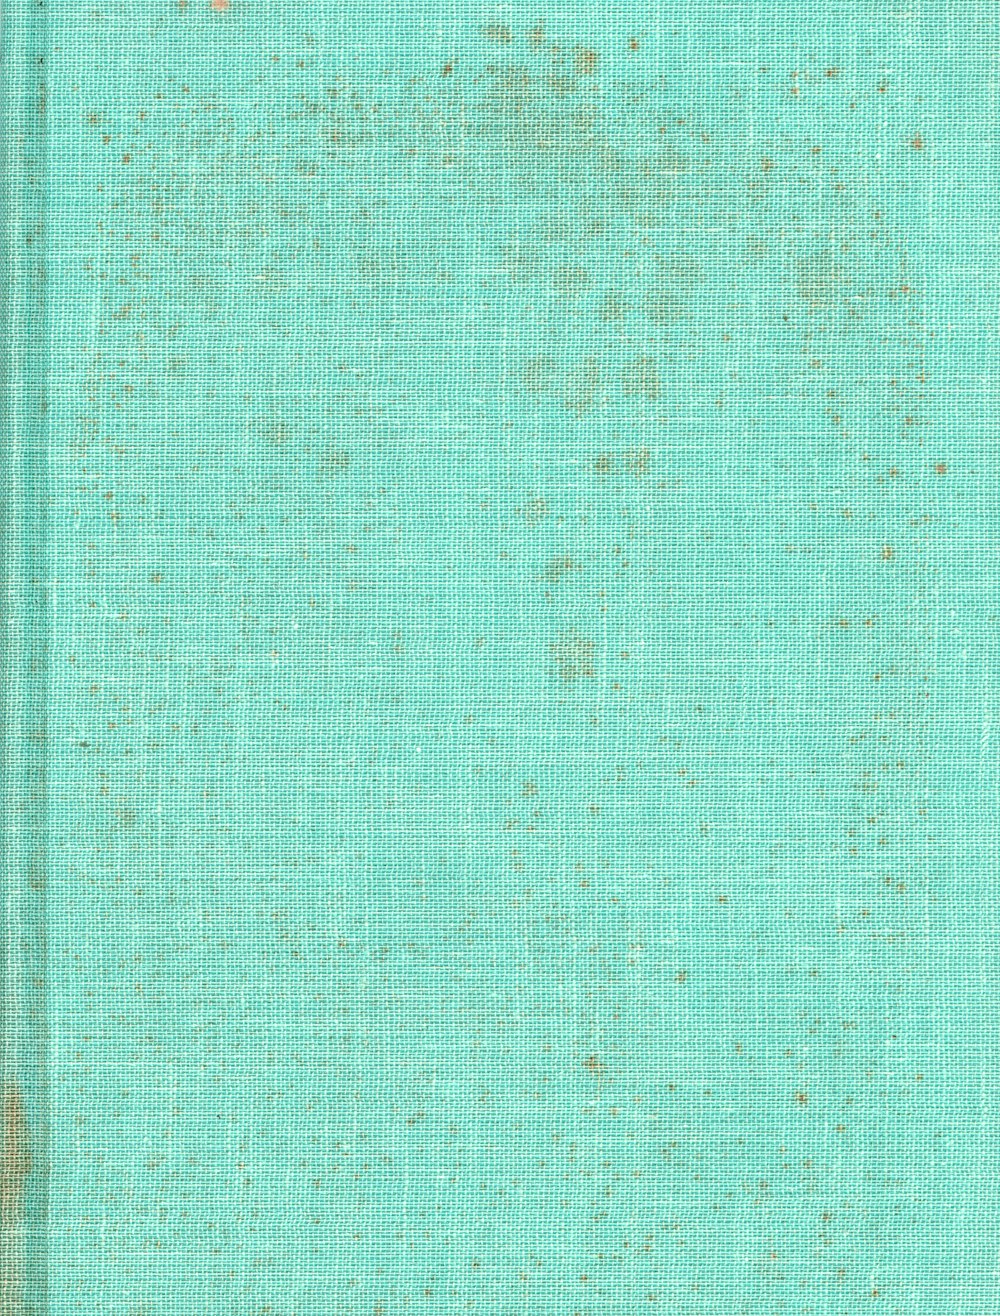 a blue book with brown spots on it